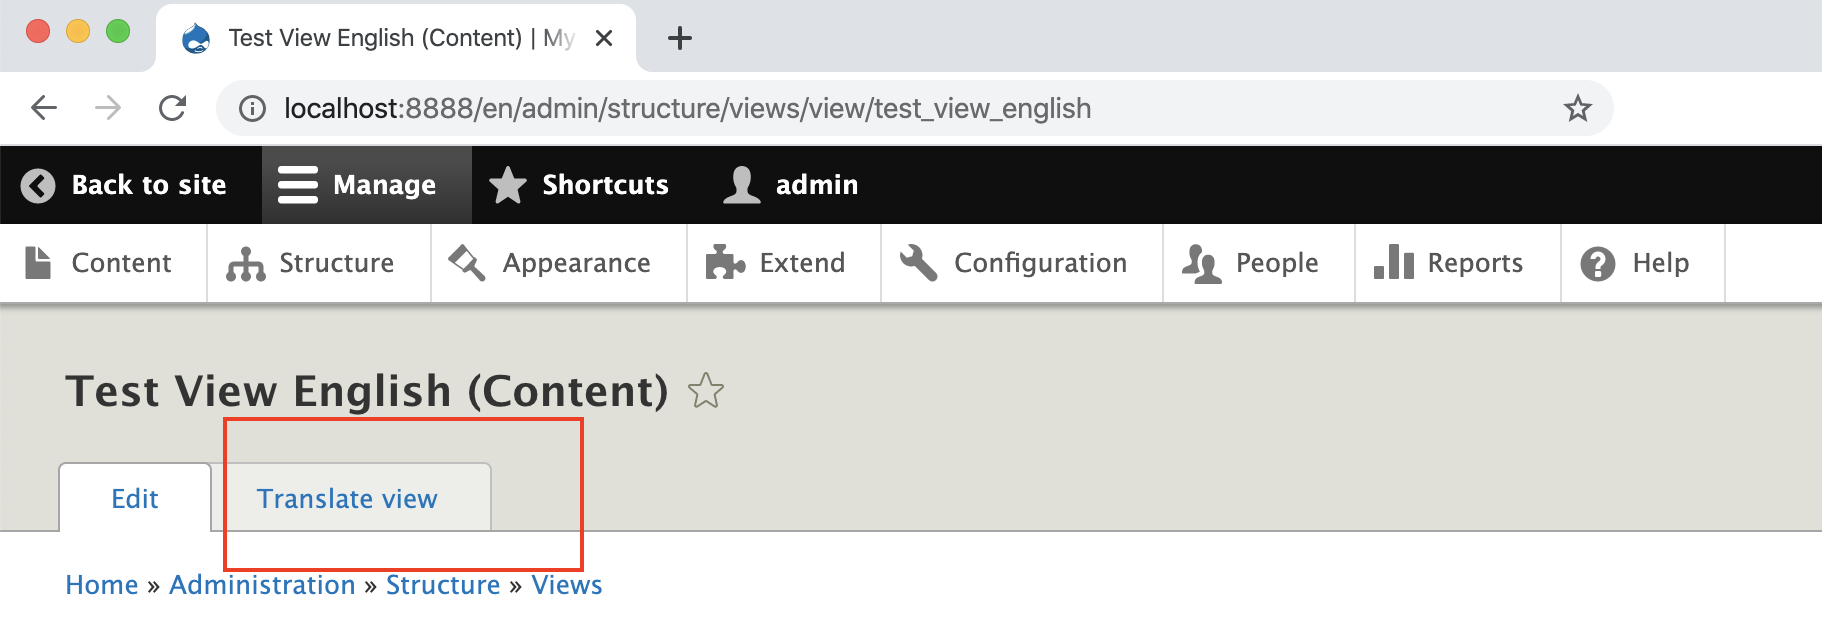 screenshot of backend for test view english content